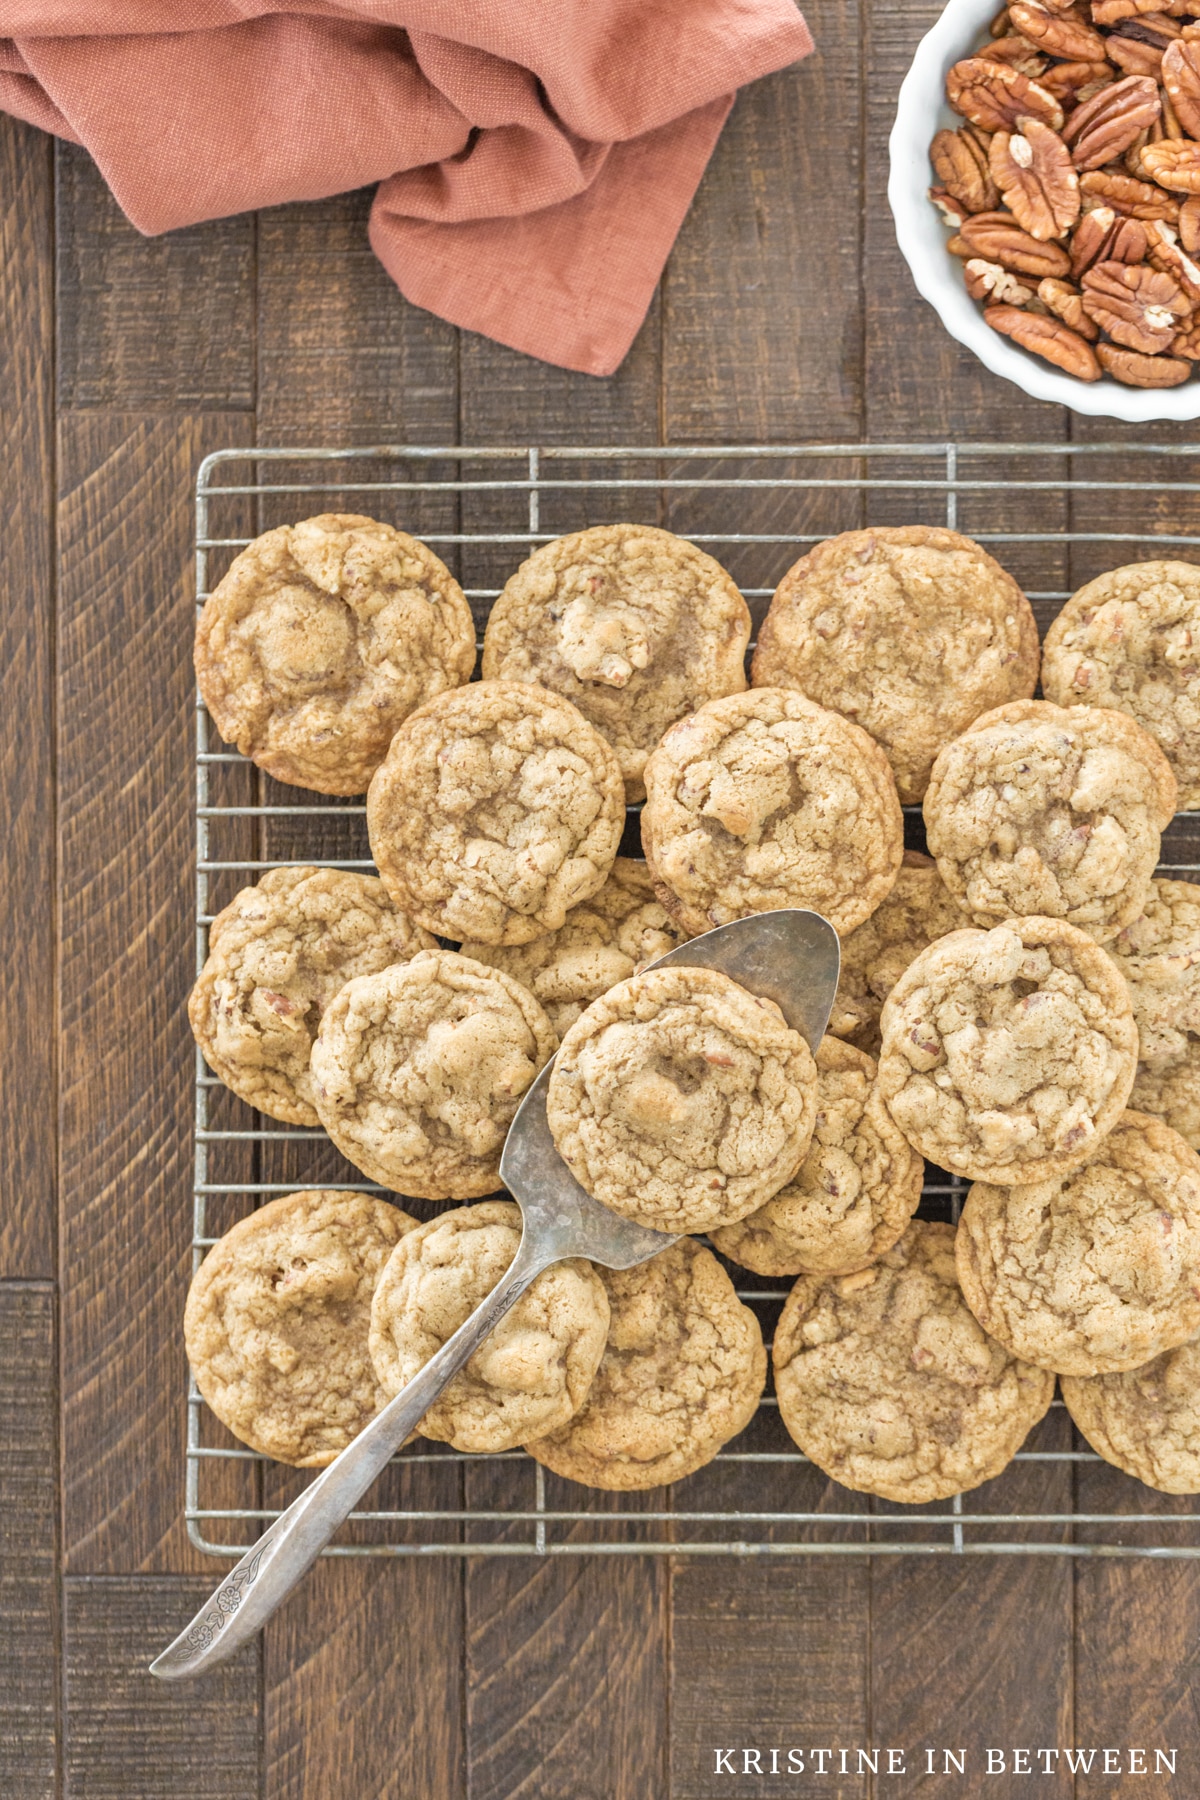 Cookies piled up on a wire rack with an antique spatula and a small bowl of pecans.